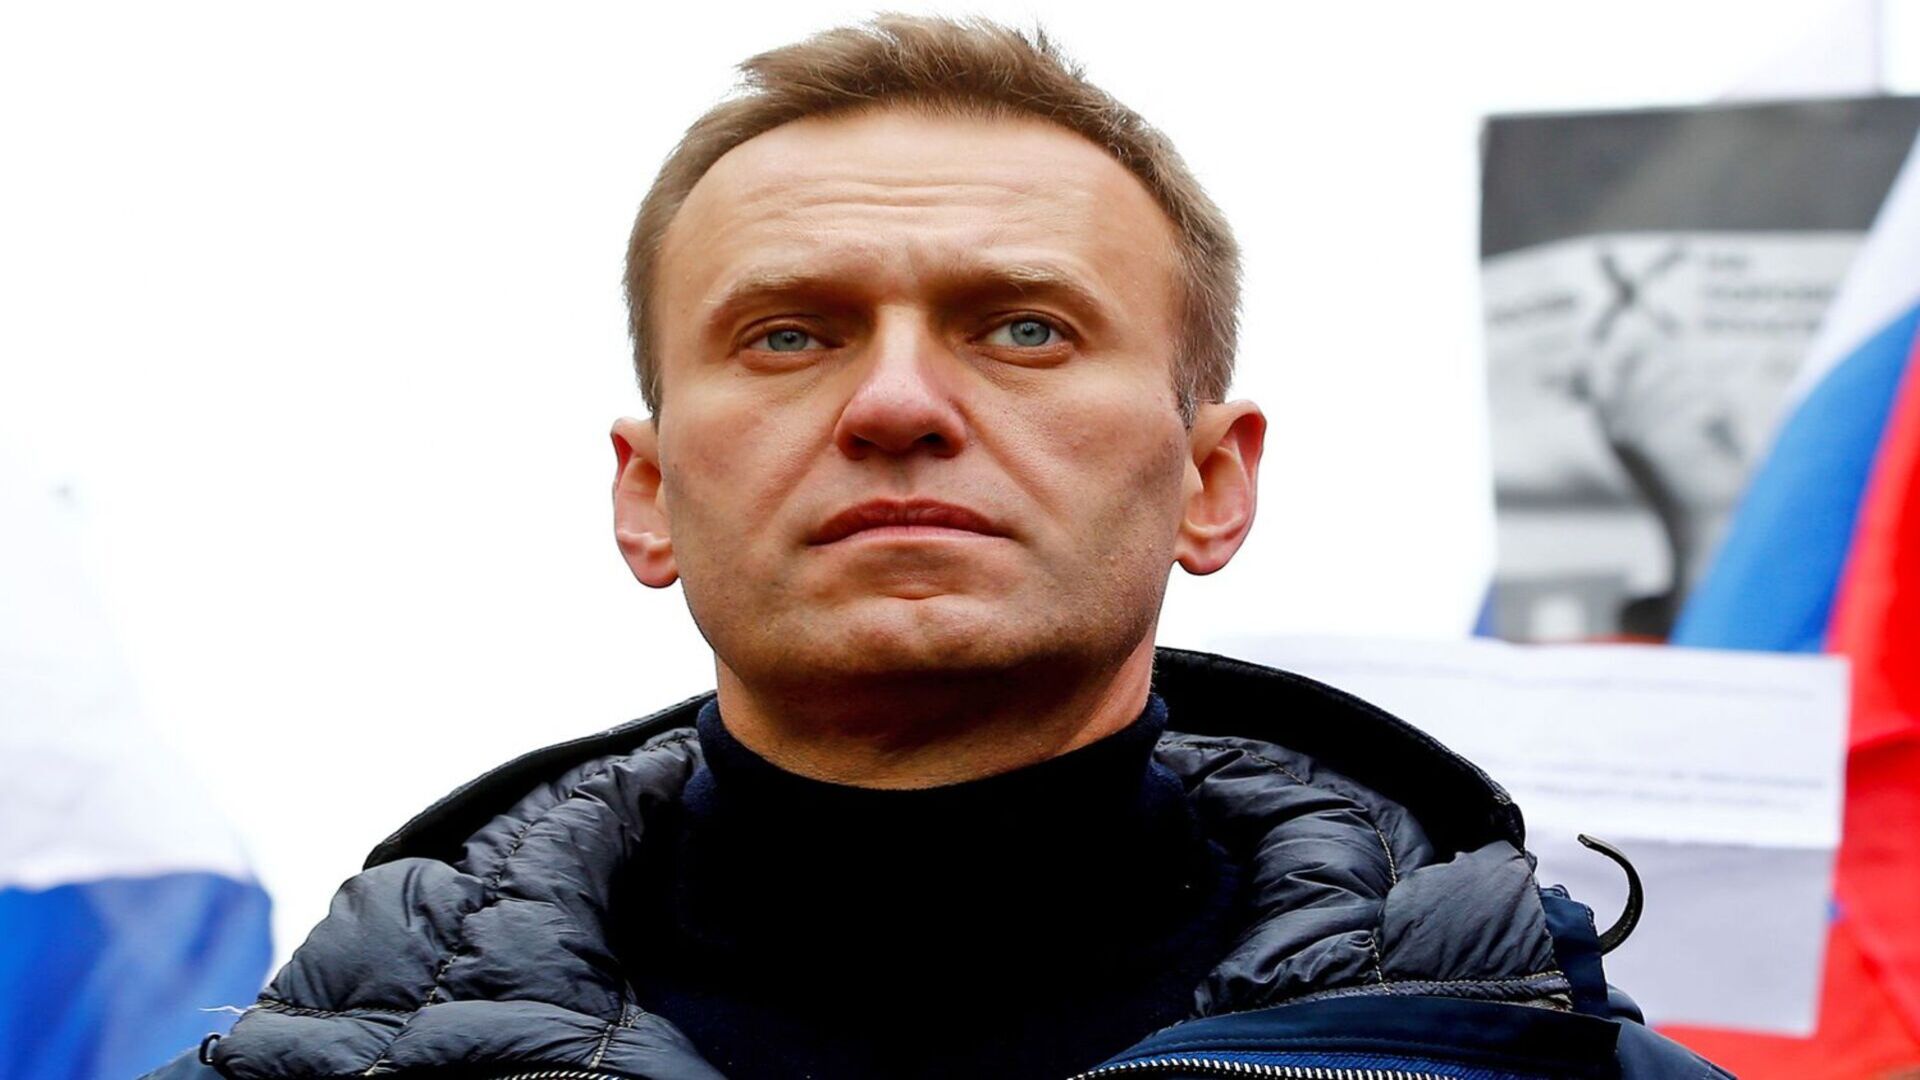 Body Of Alexei Navalny Found In a Morgue, says reports